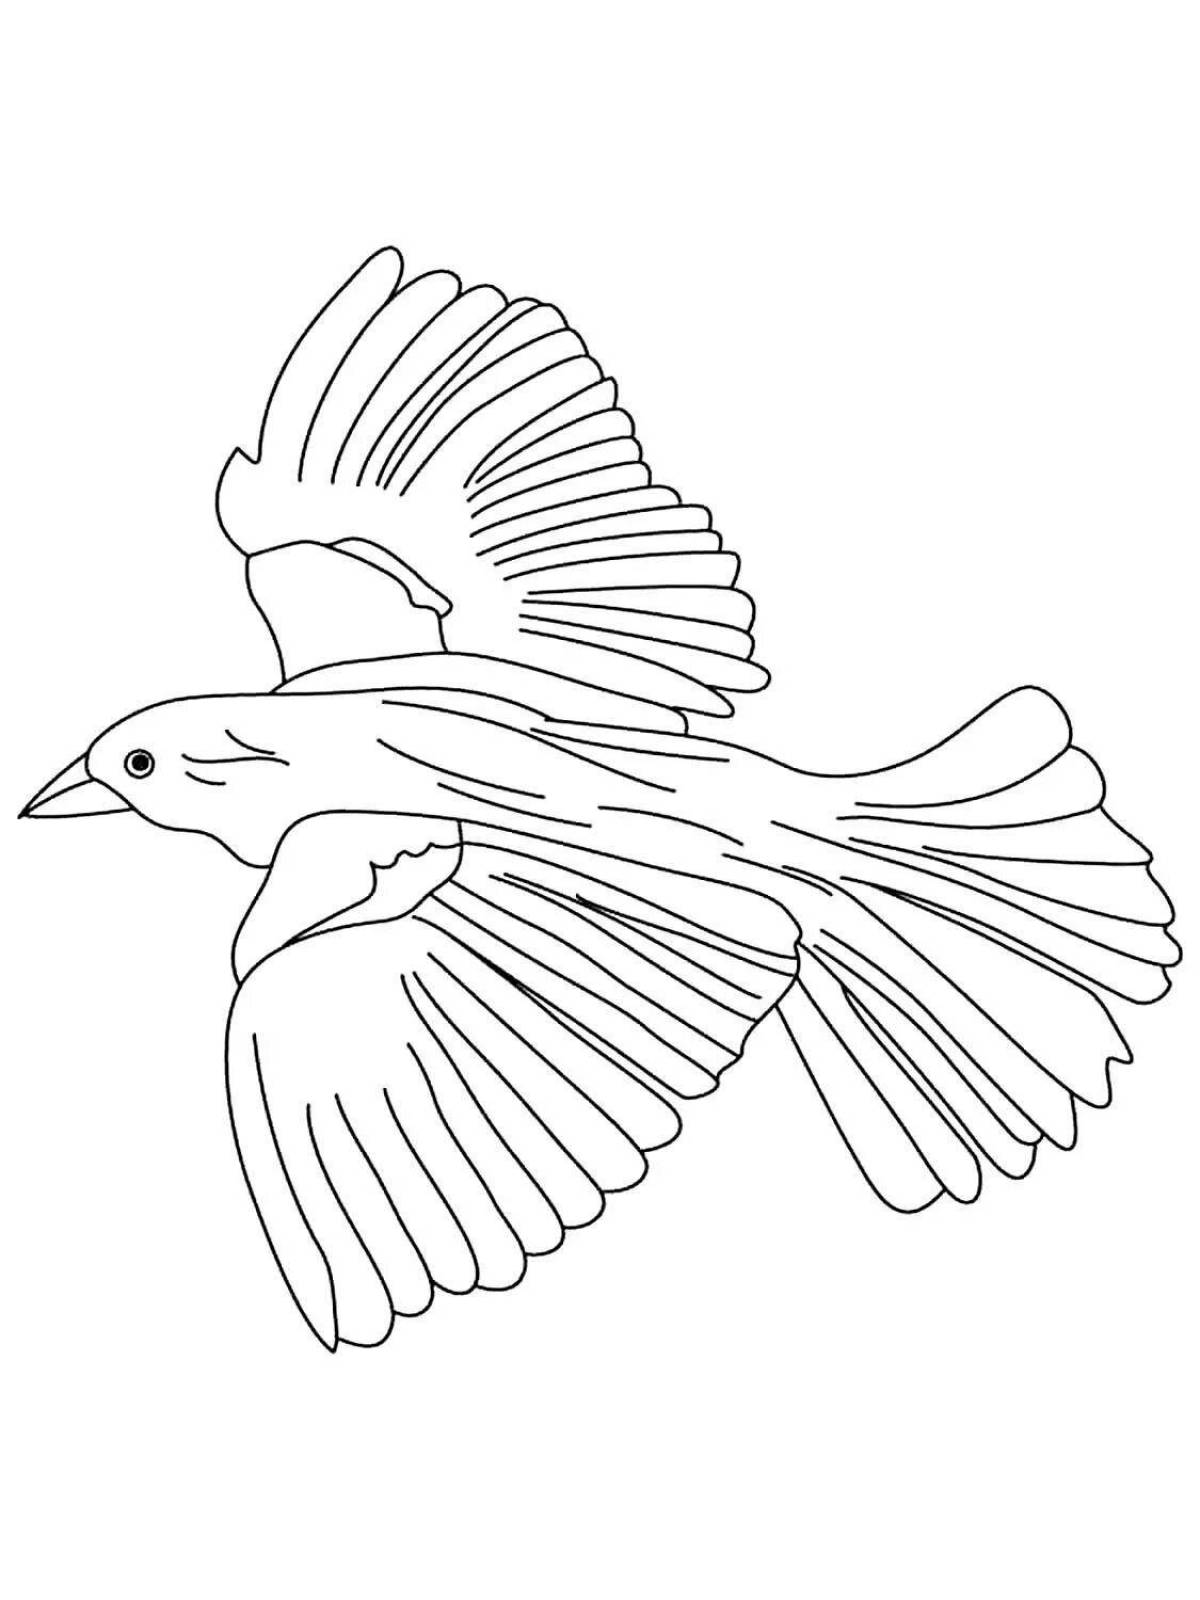 Adorable flying birds coloring page